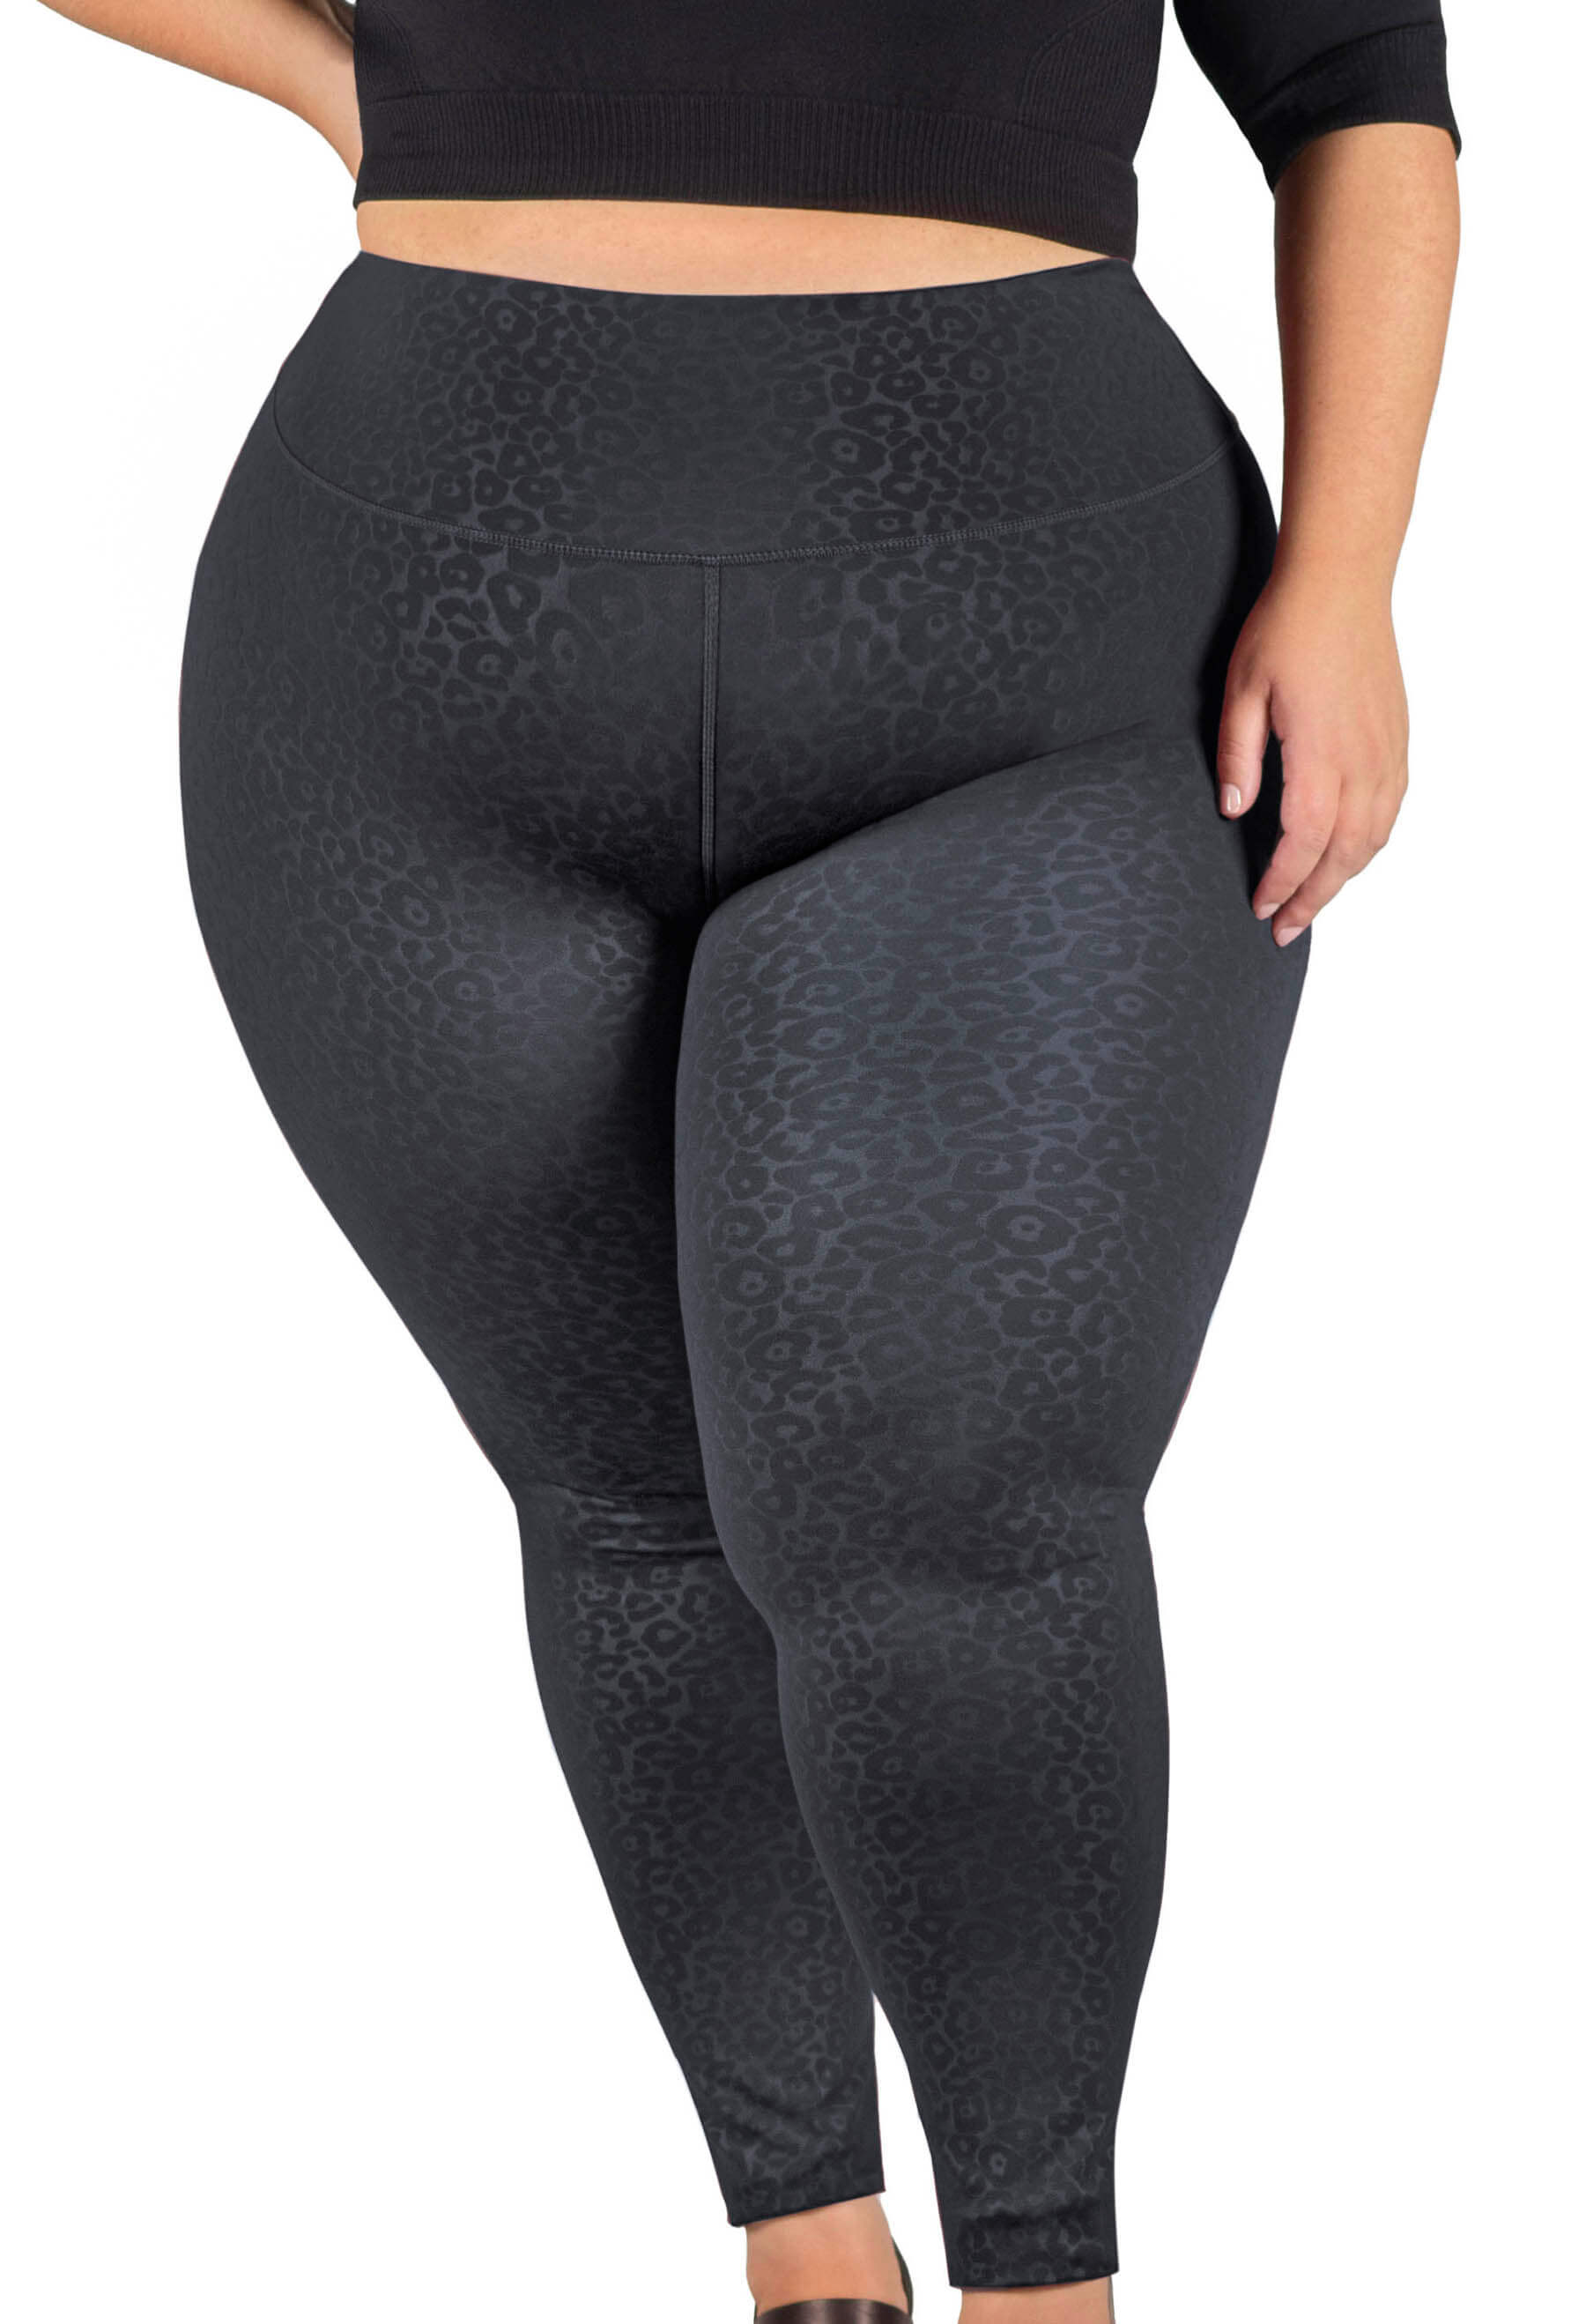 High-Waisted Cozy-Lined Cheetah Print Leggings for Women